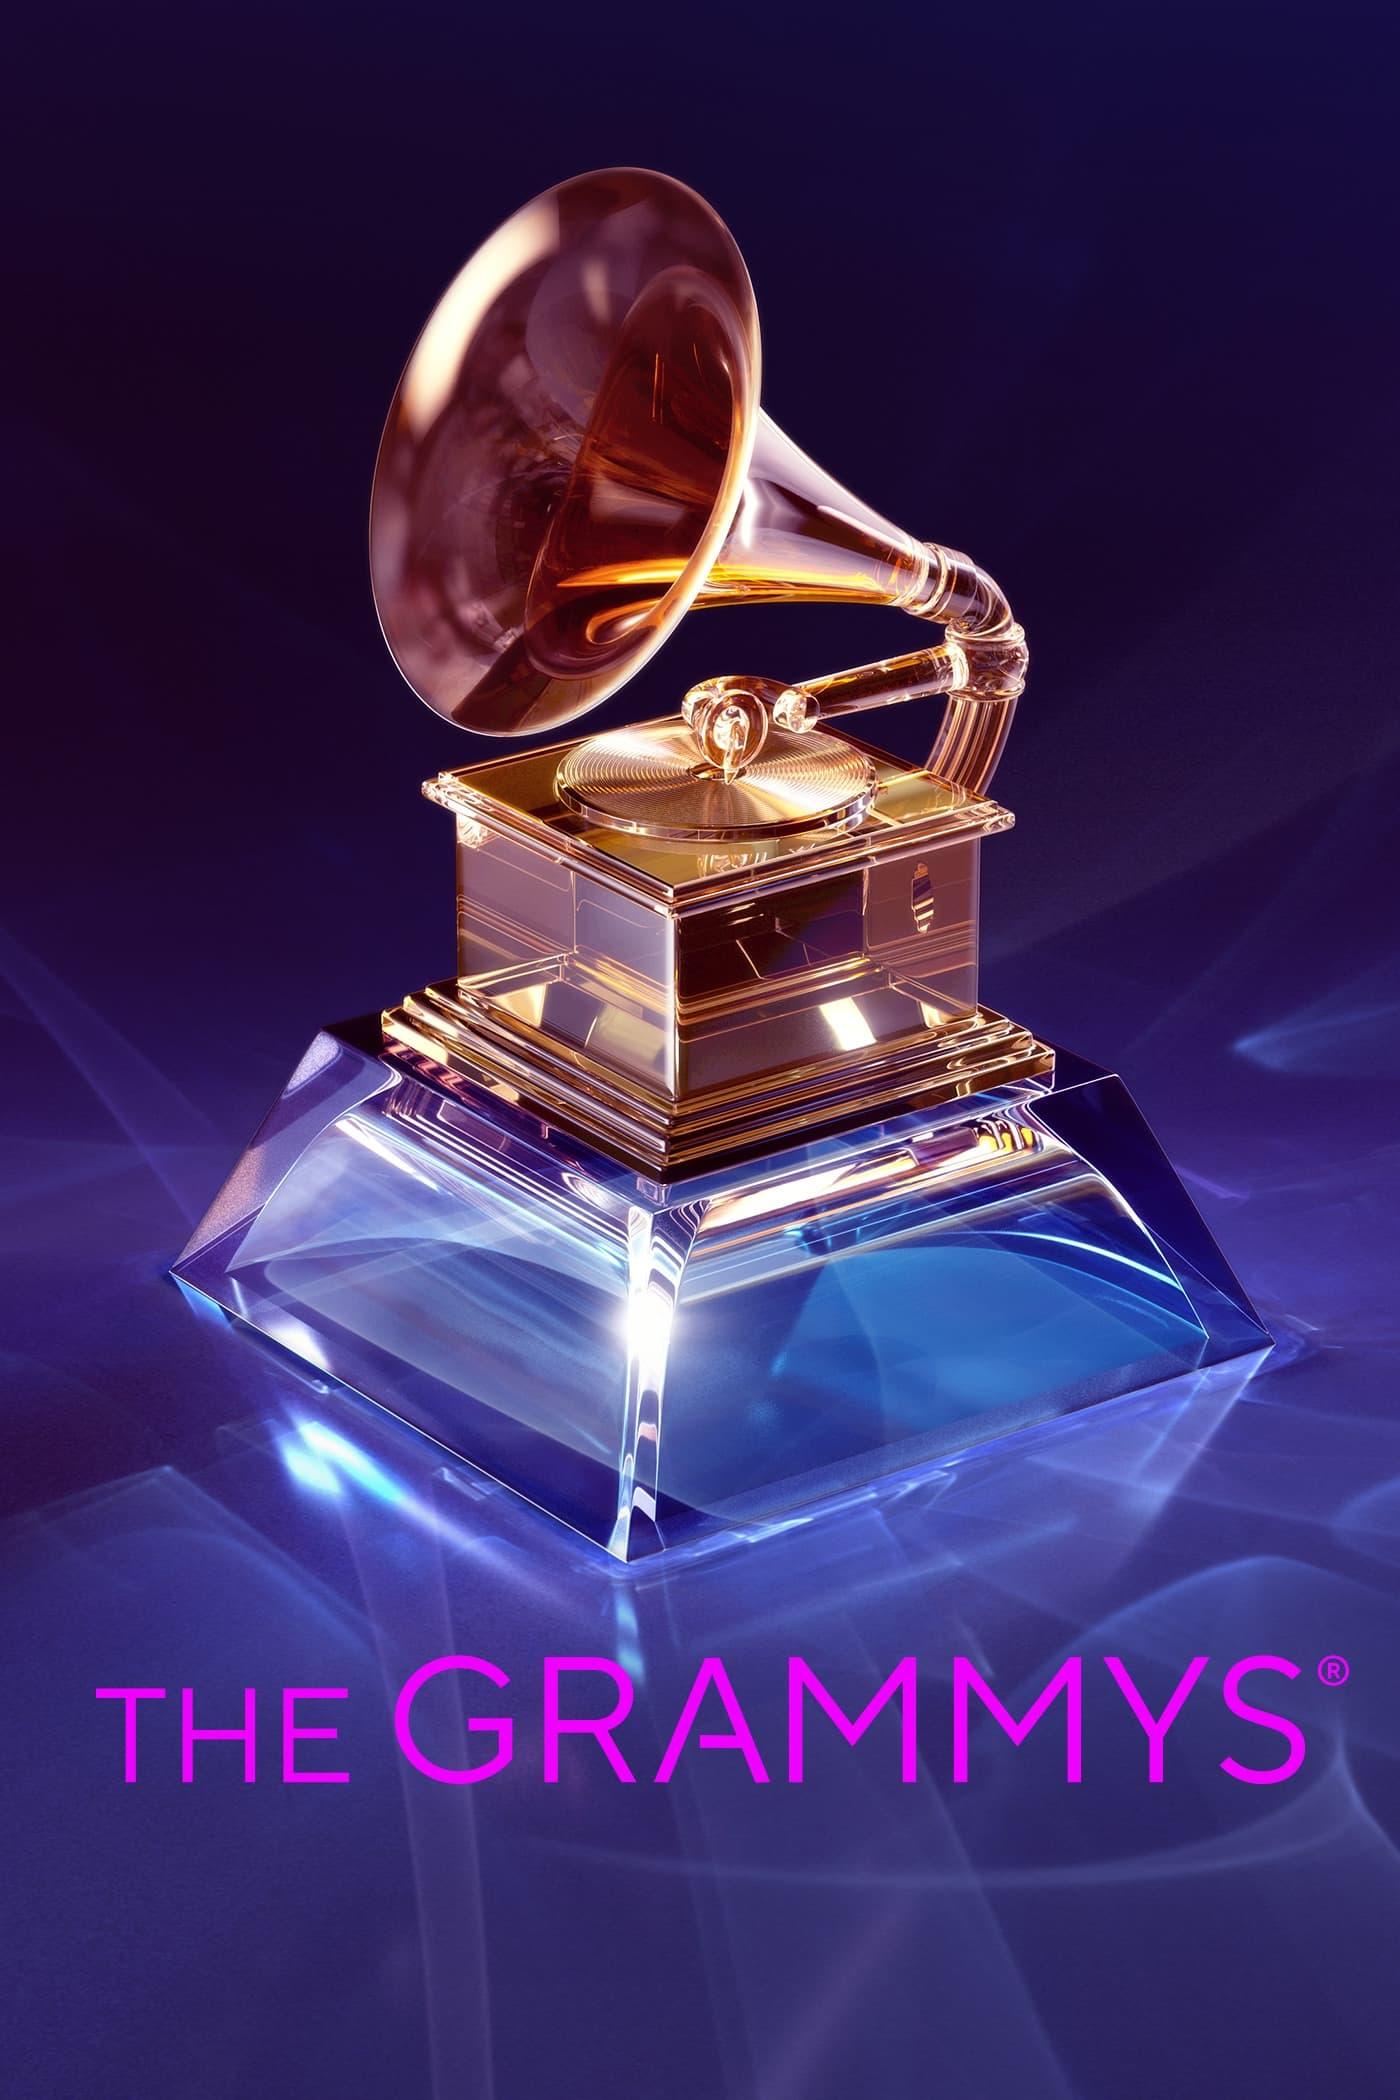 The Grammy Awards poster